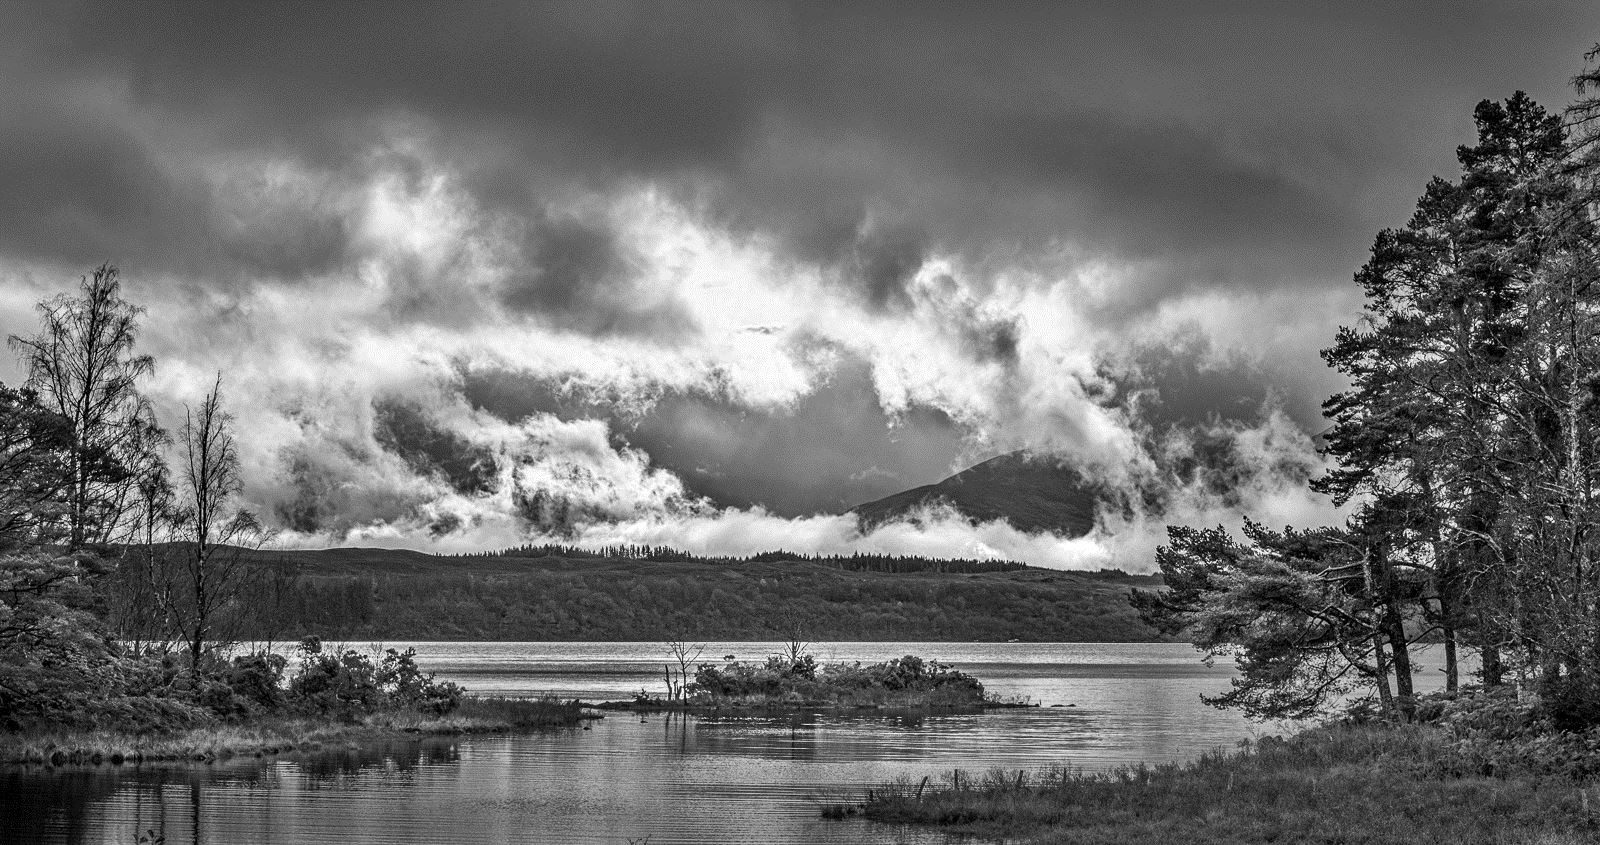 Storm clearing - Andy Kirby. Monochrome